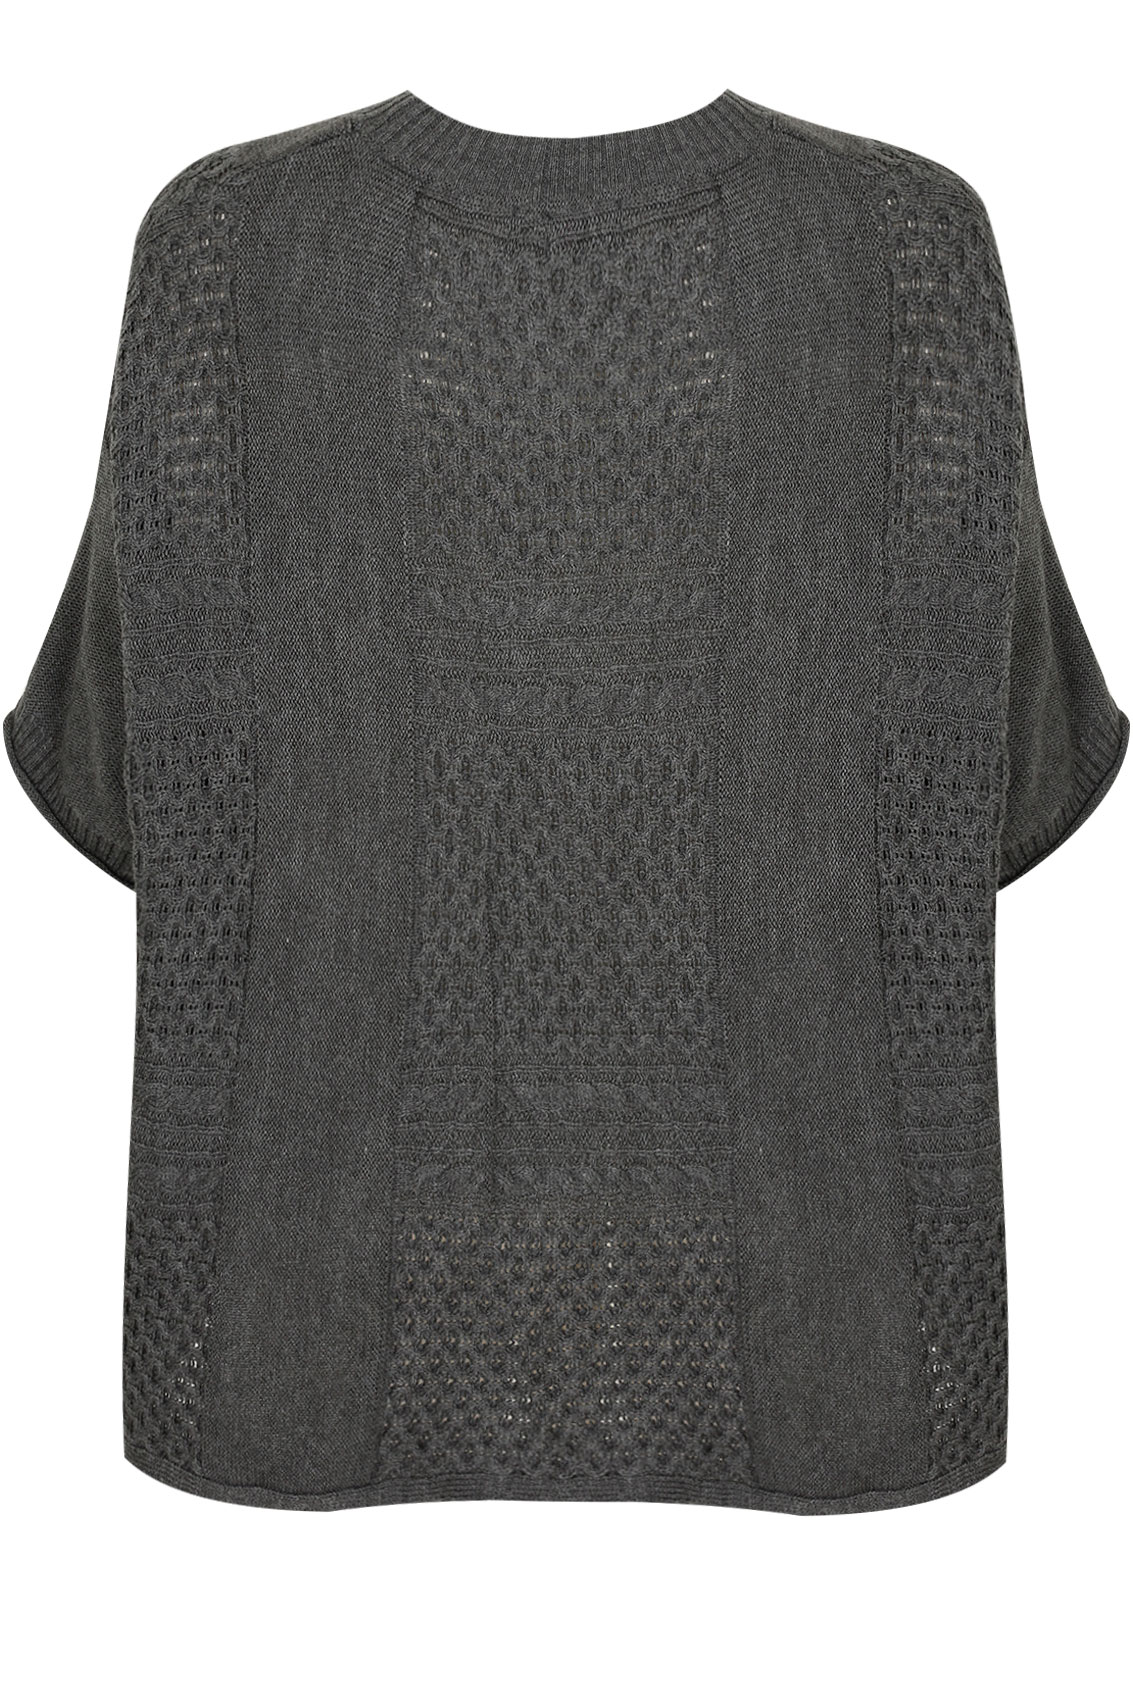 Charcoal Grey Tabard With Patchwork Stitch , Plus Size 16 to 32